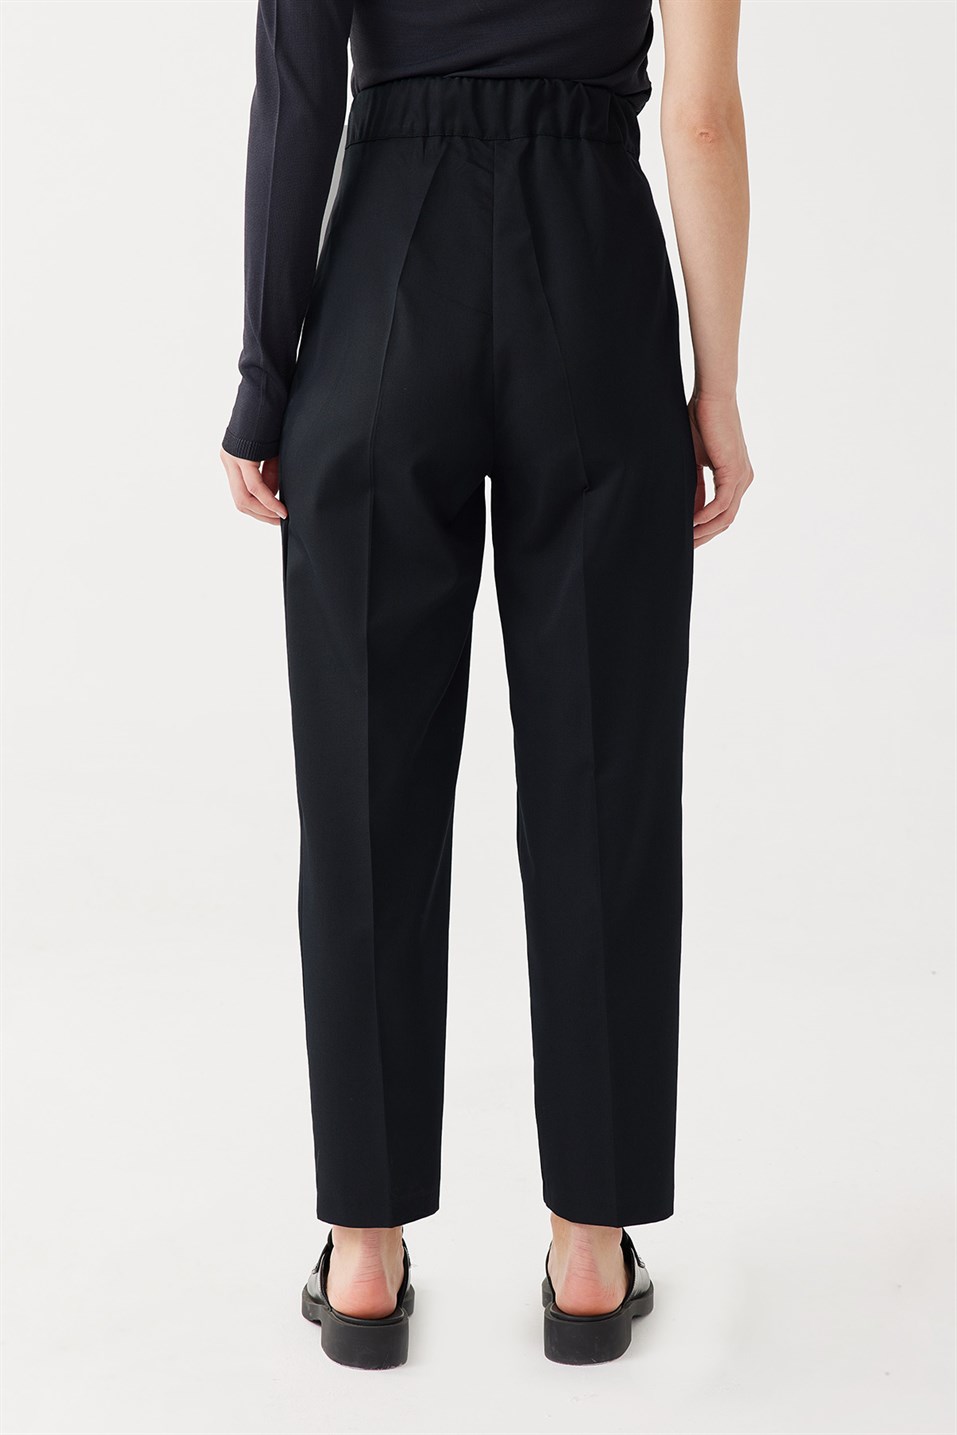 Black Carrot Cut Pleated Fabric Trousers